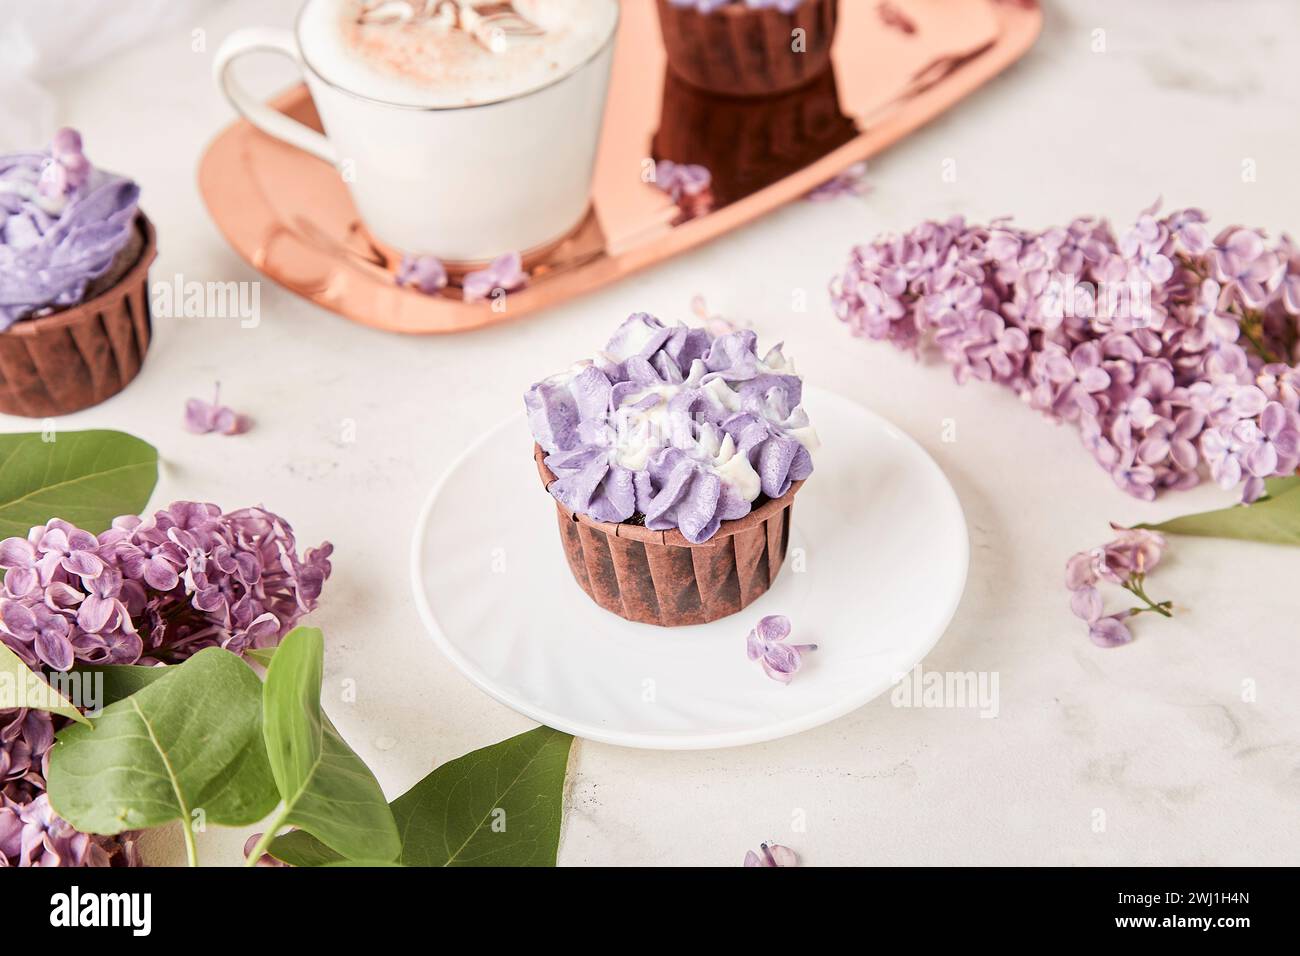 Aesthetics close up purple floral cupcakes using trend Dreamy Escapism. Desserts and flowers background. Stock Photo